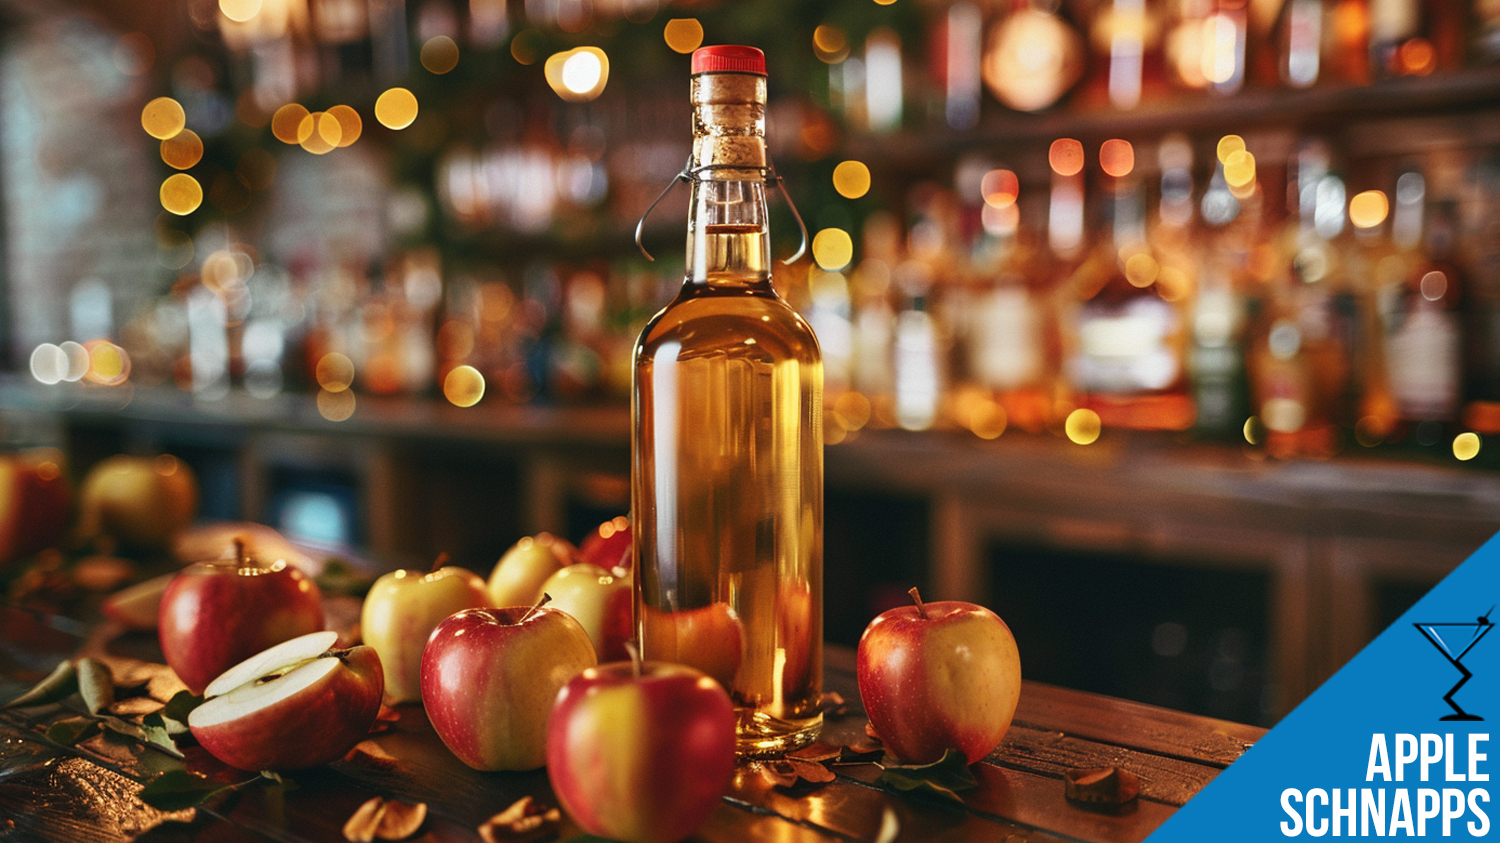 Best Apple Schnapps Cocktails: Recipes, Flavors, and Top Brands